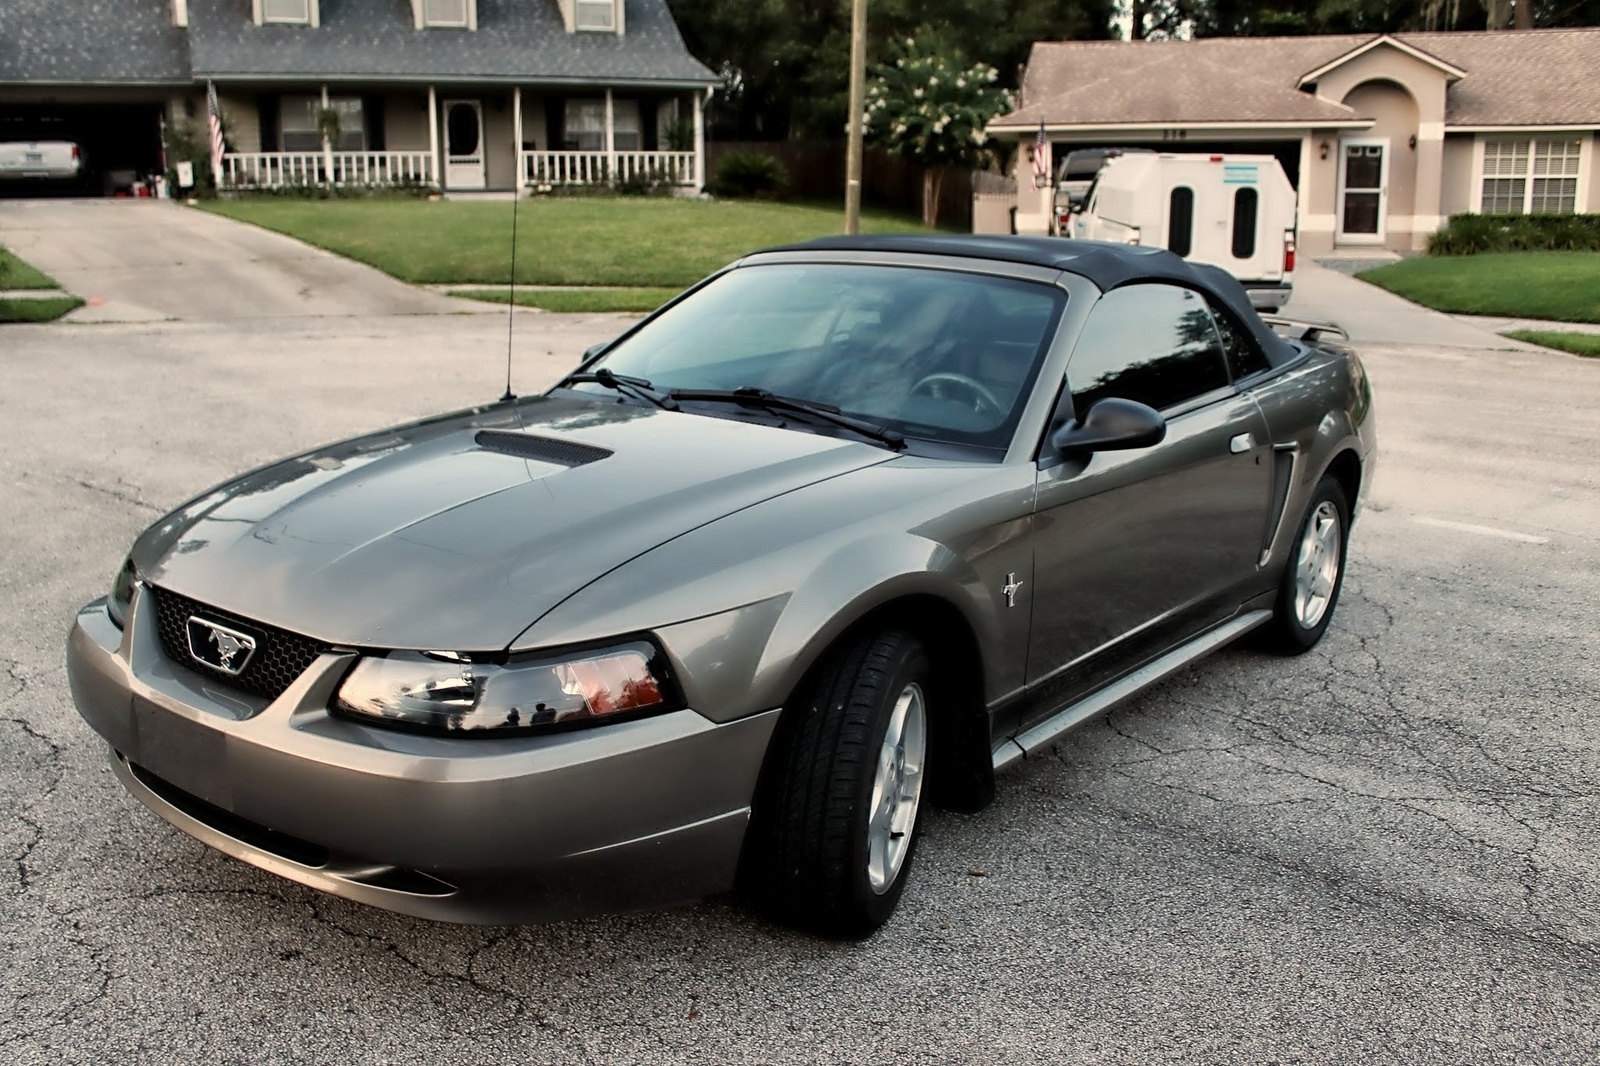 2002 Ford mustang deluxe reviews #1